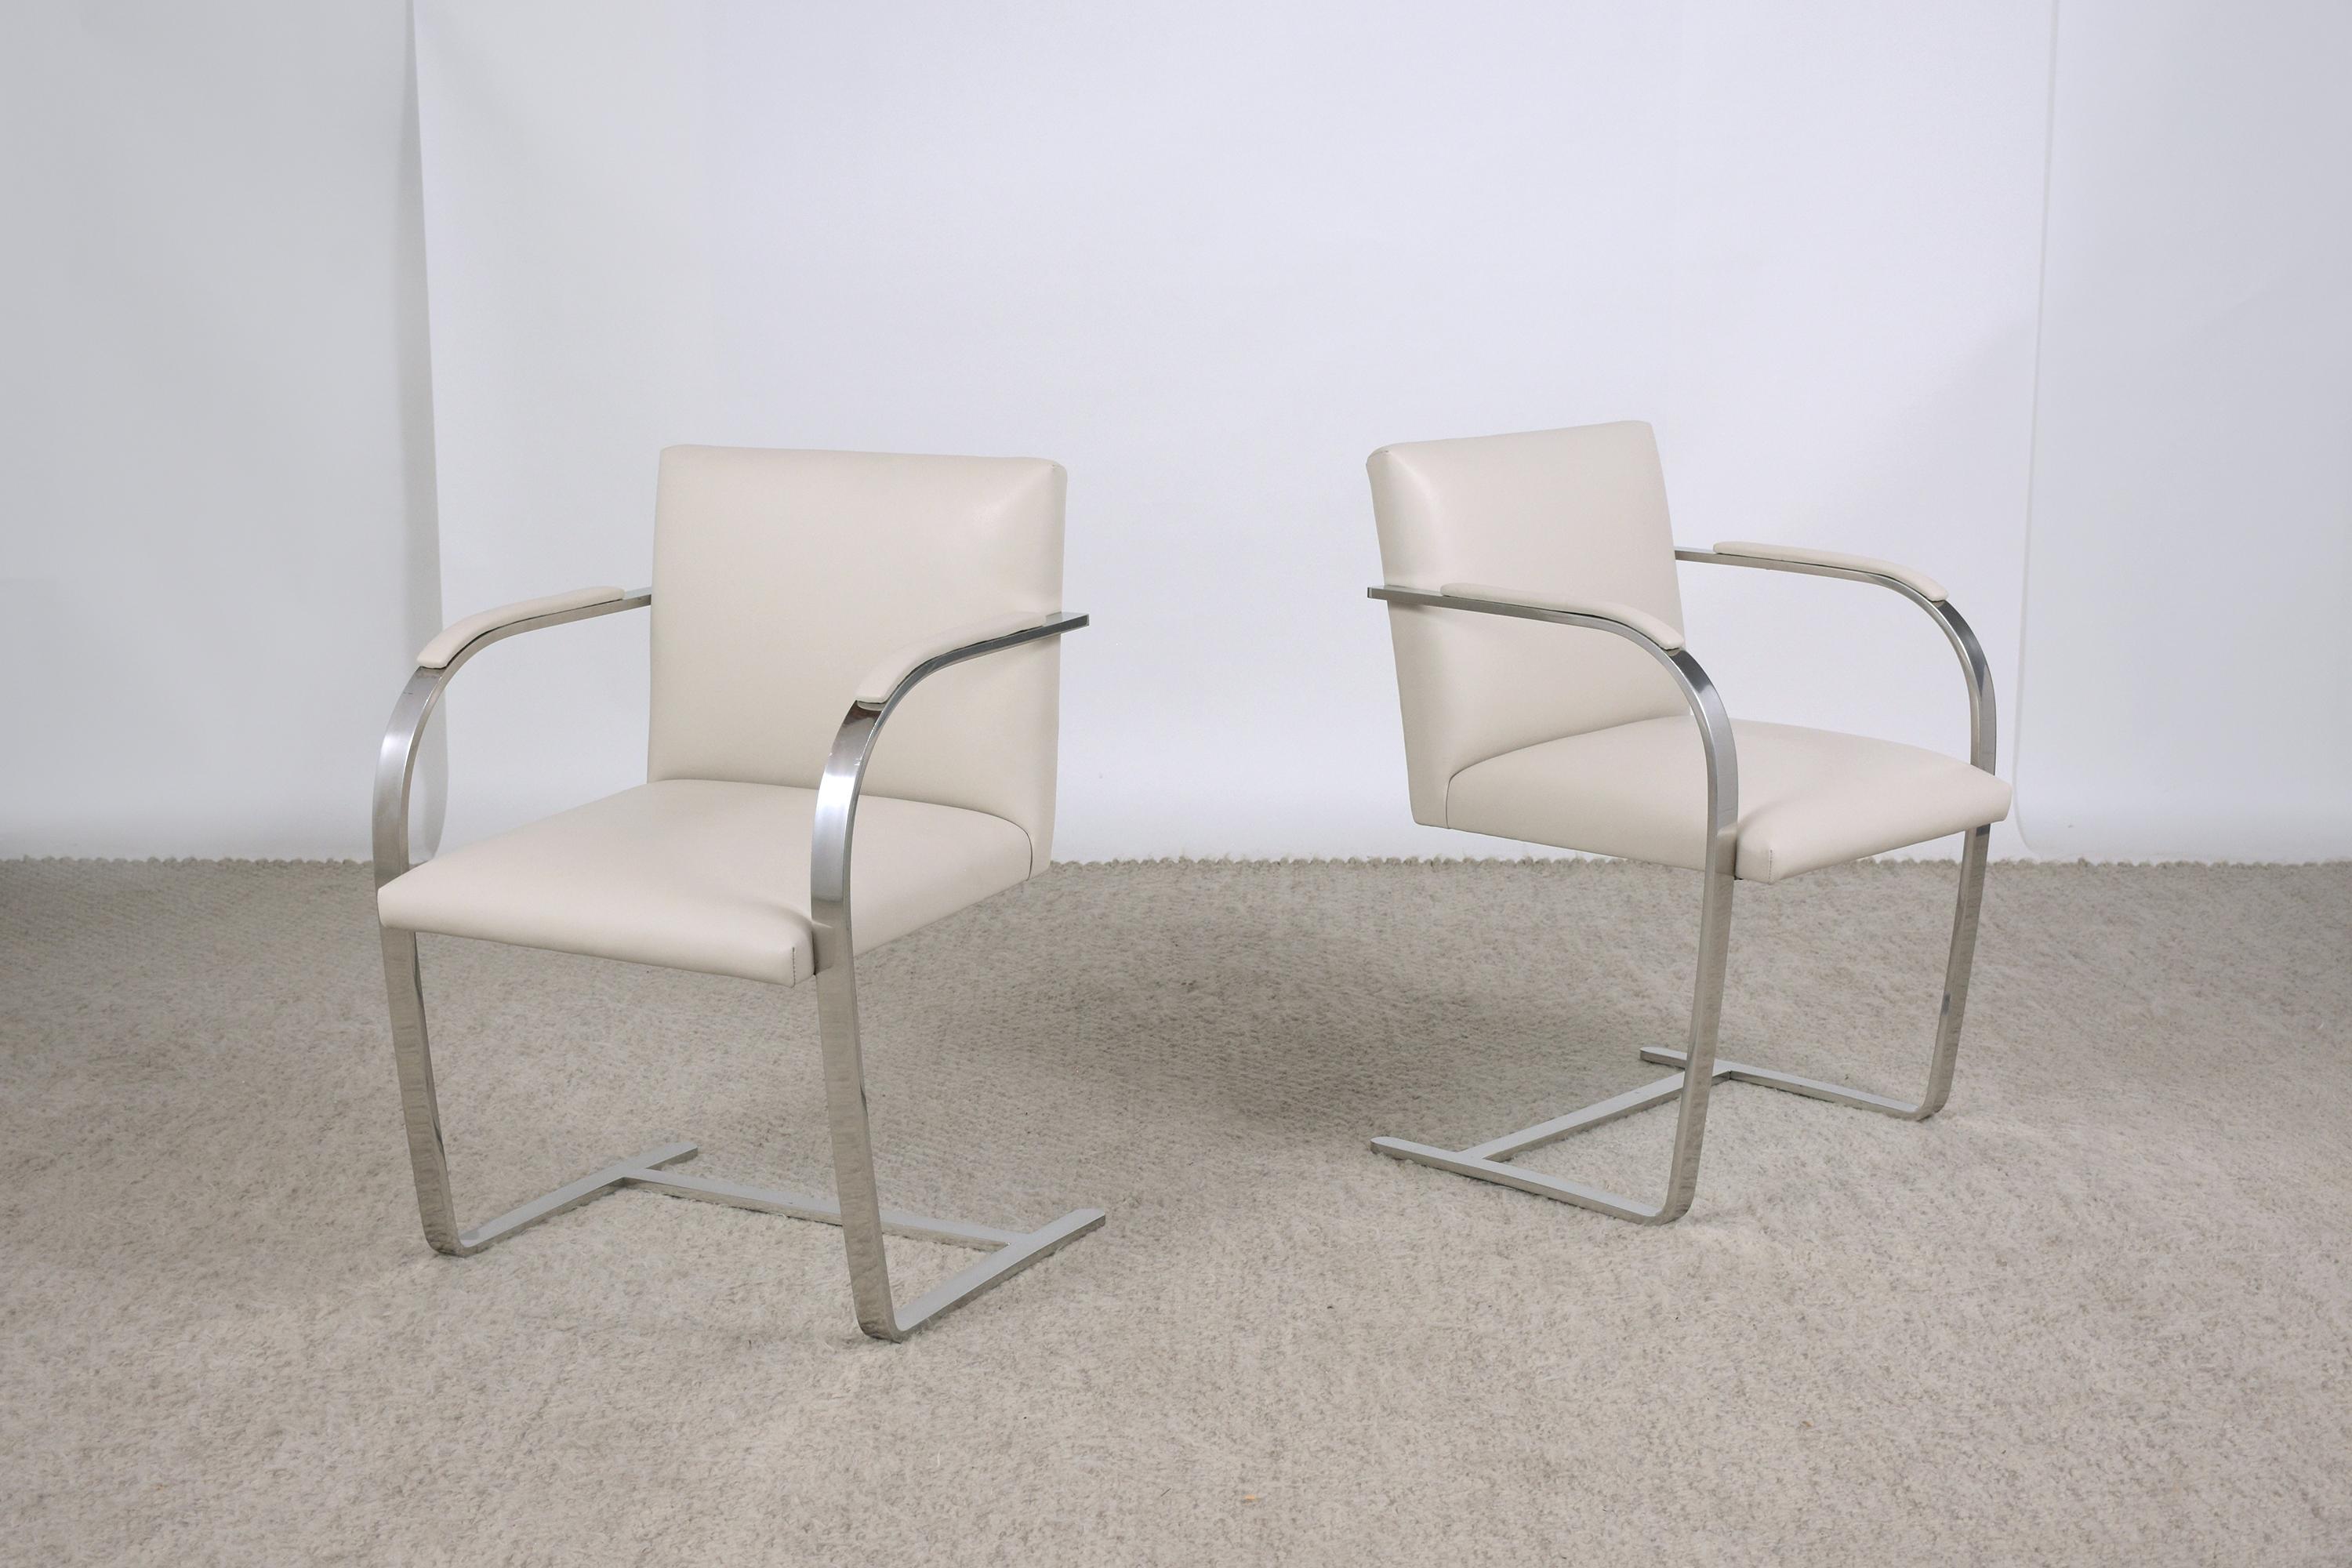 An extraordinary set of two Mies Van Der Rohe Brno armchairs by Knoll is in great condition and has been newly upholstered by our team of expert craftsmen. The chairs have a sturdy steel frame that has been polished/buffed and is newly upholstered